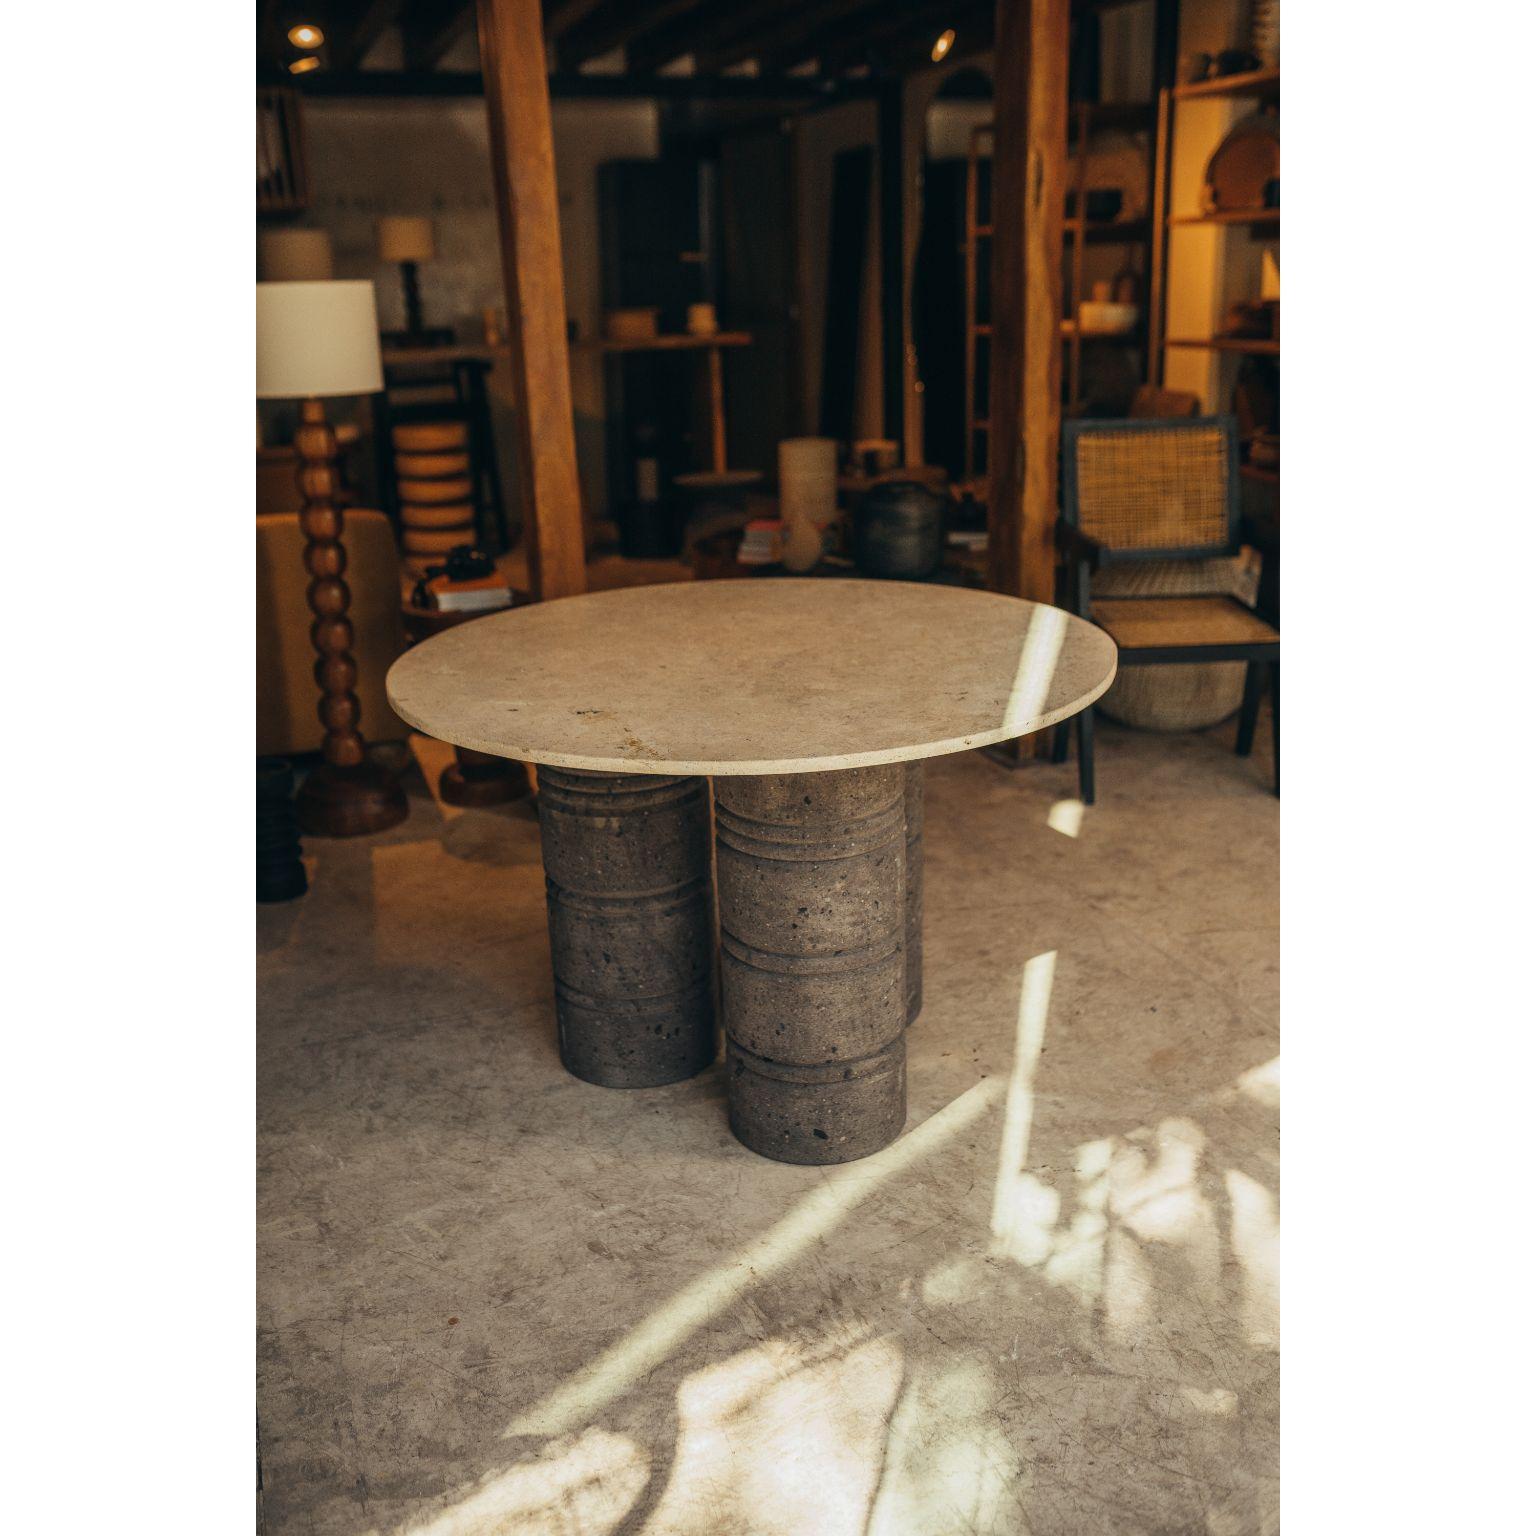 Travertine table with Turned Quarry Legs by Daniel Orozco
Dimensions: D 120 x H 75 cm
Materials: Travertine

Daniel Orozco Estudio
We are an inclusive interior design estudio, who love to work with fabrics and natural textiles in makes our